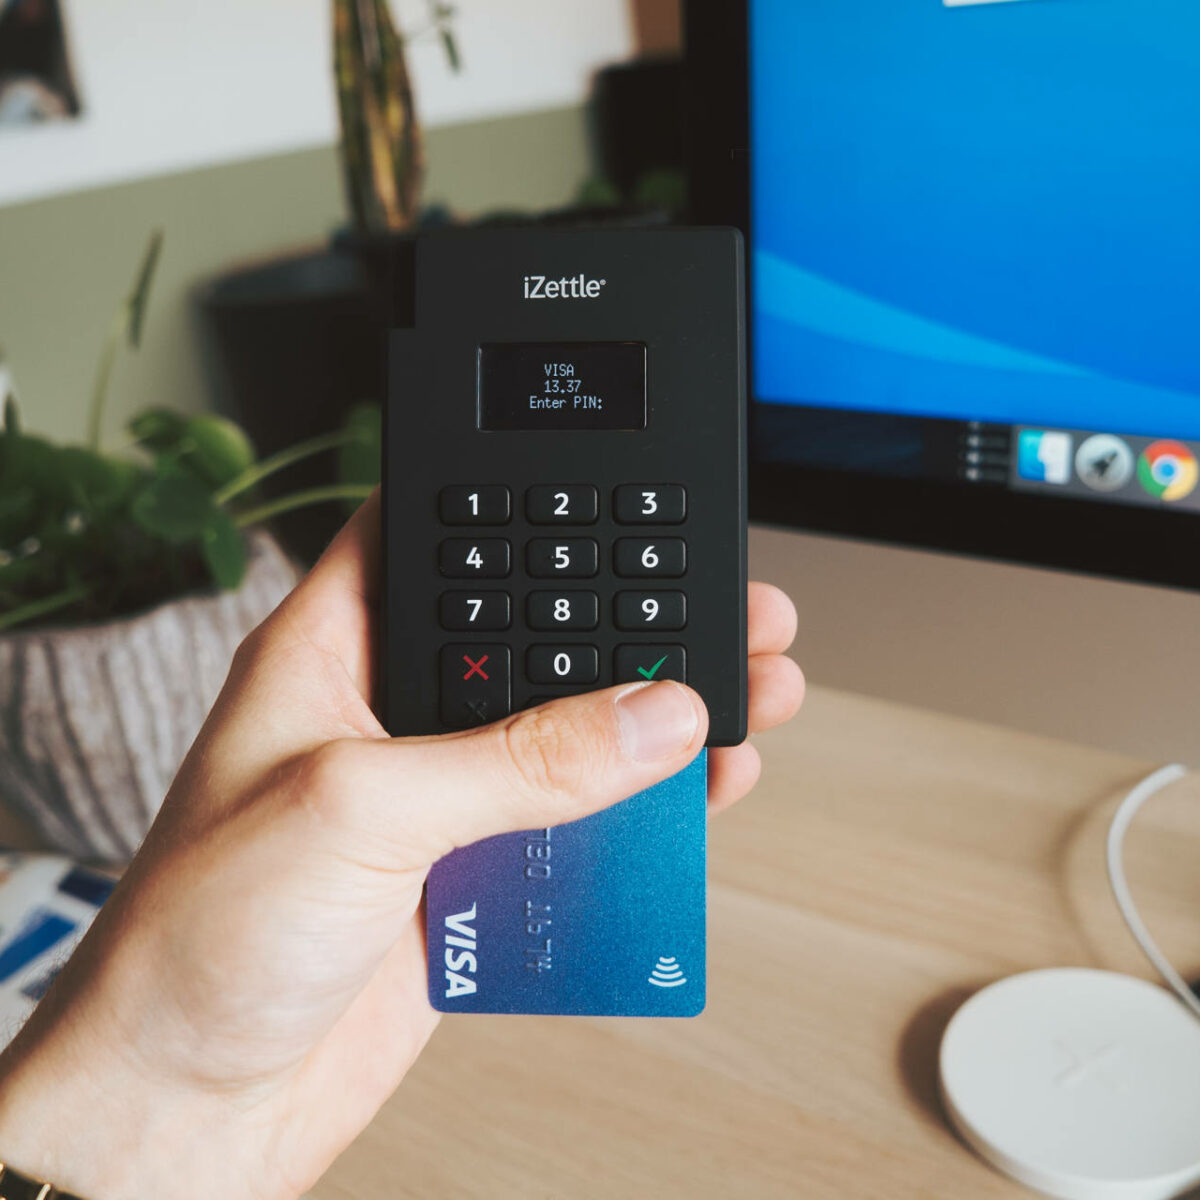 Credit Card Swipe Reader Neutral for OS 